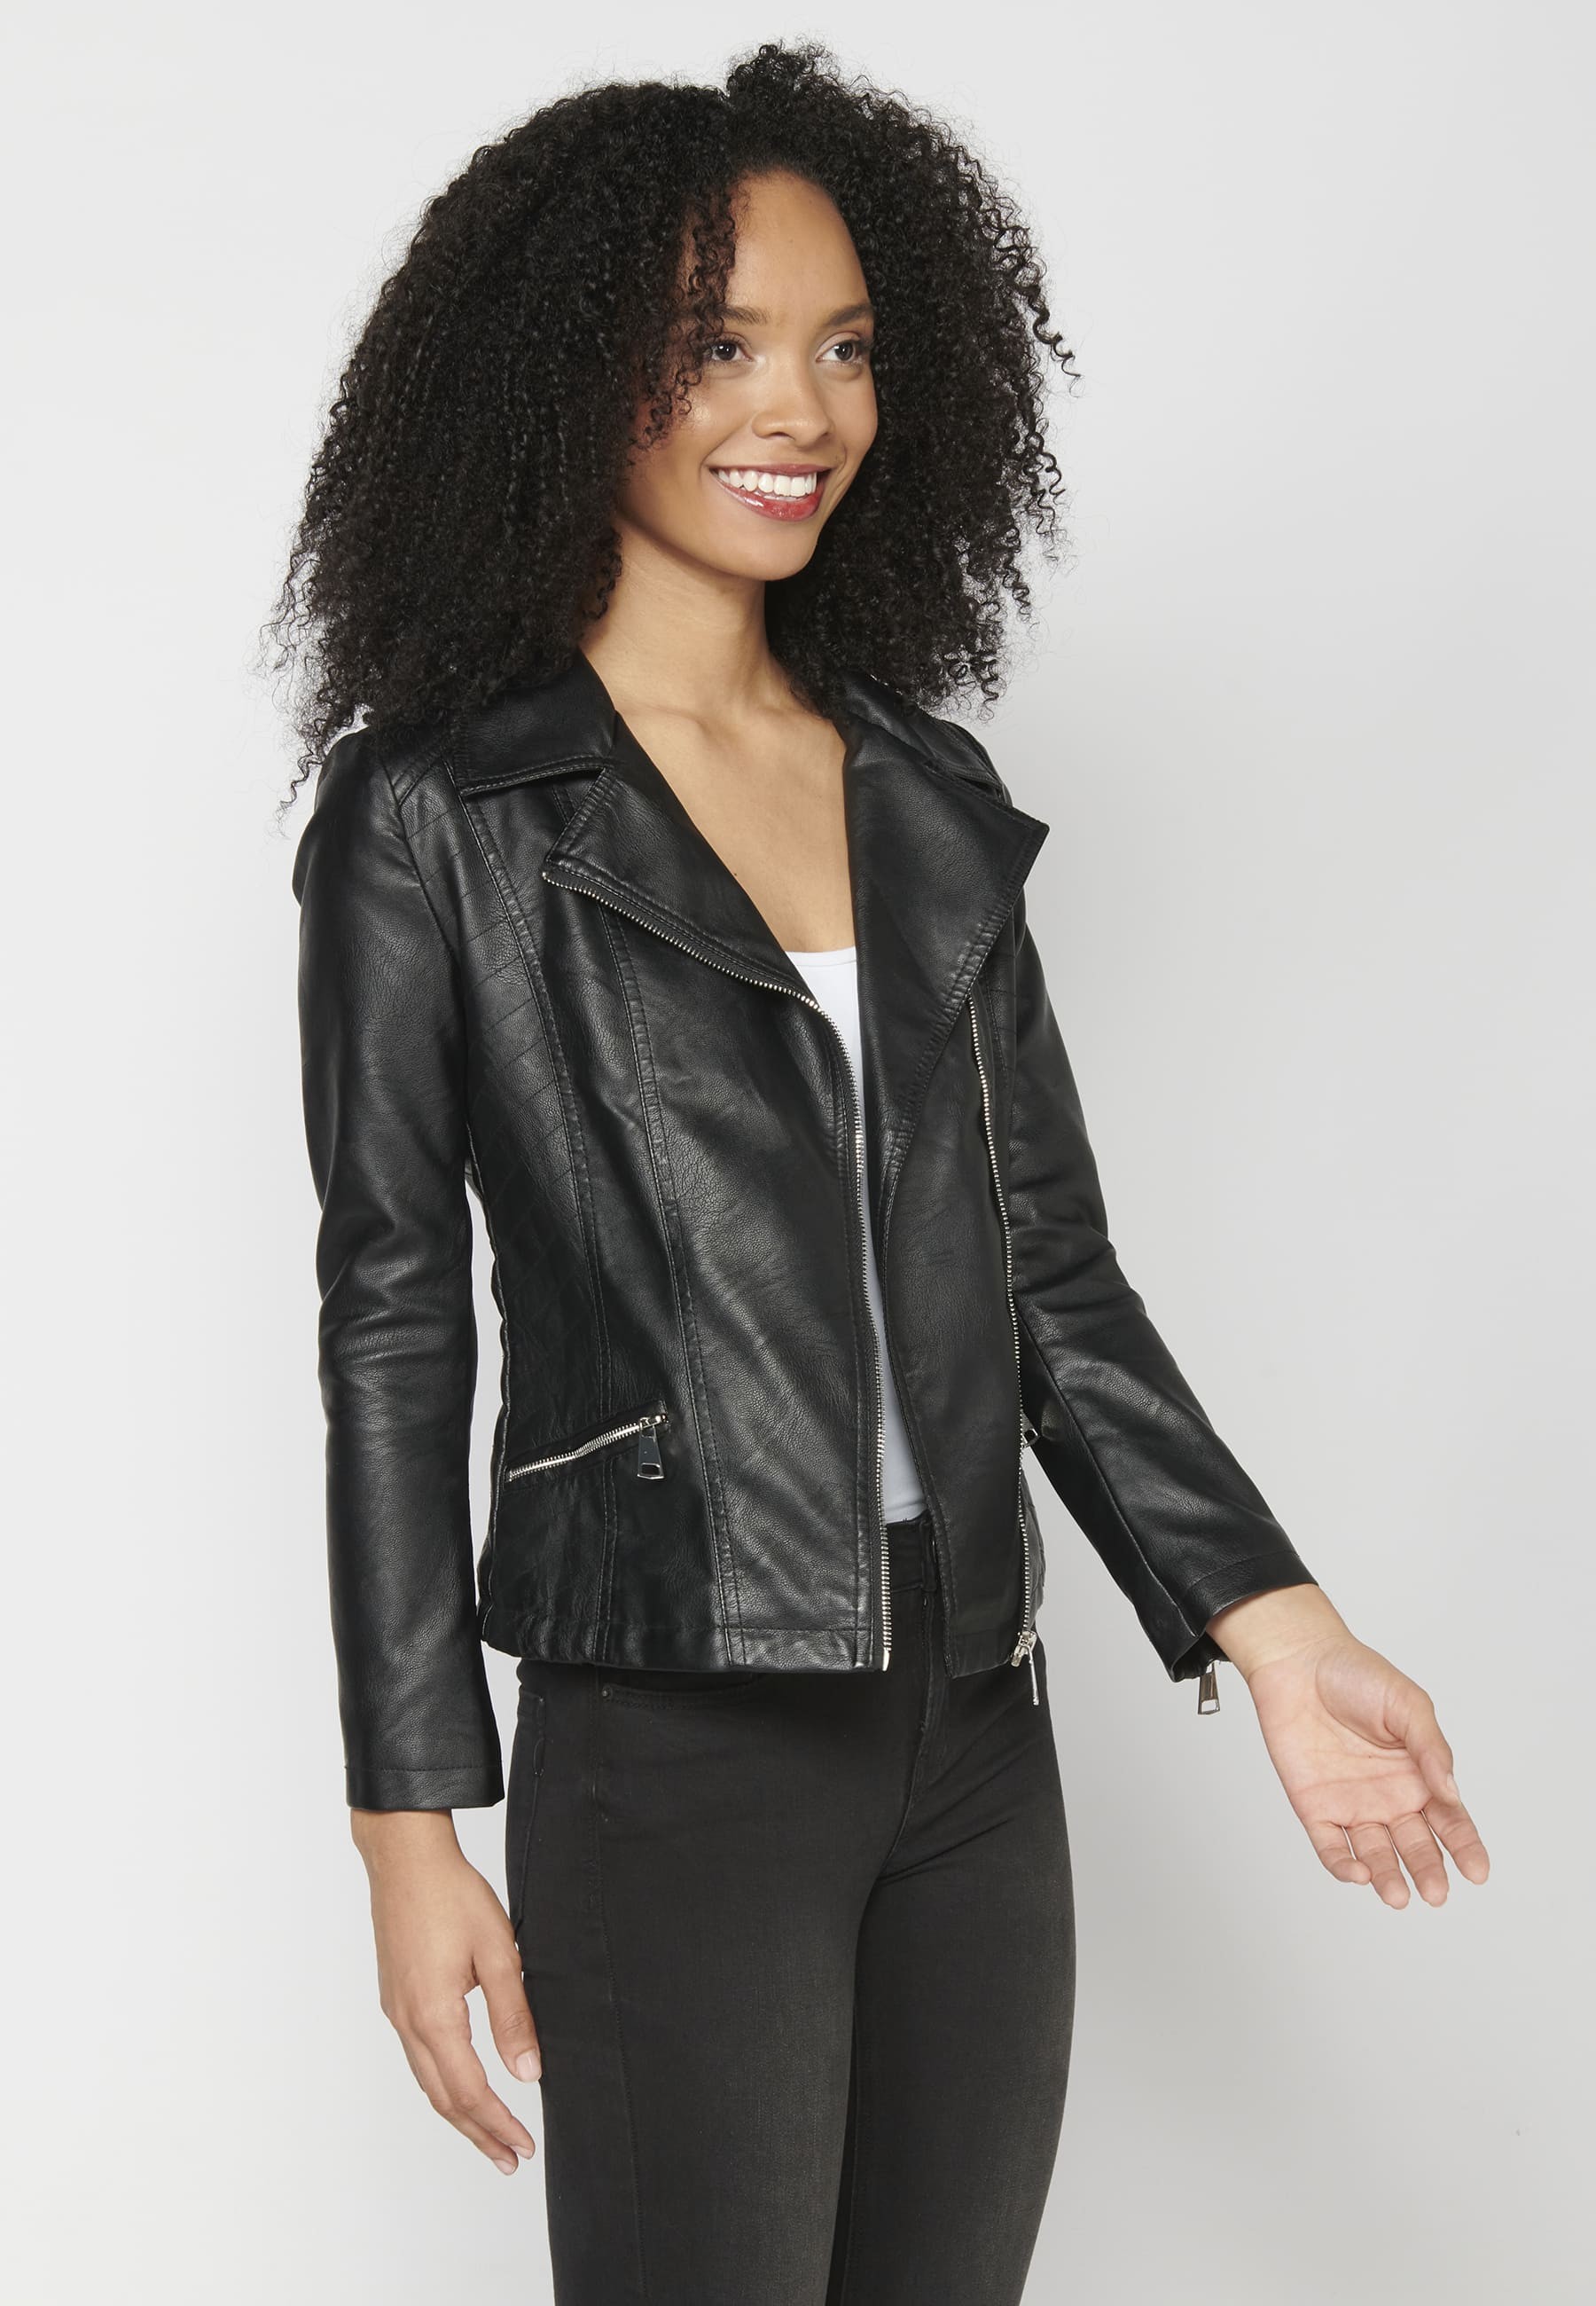 Black Synthetic Leather Jacket for Women